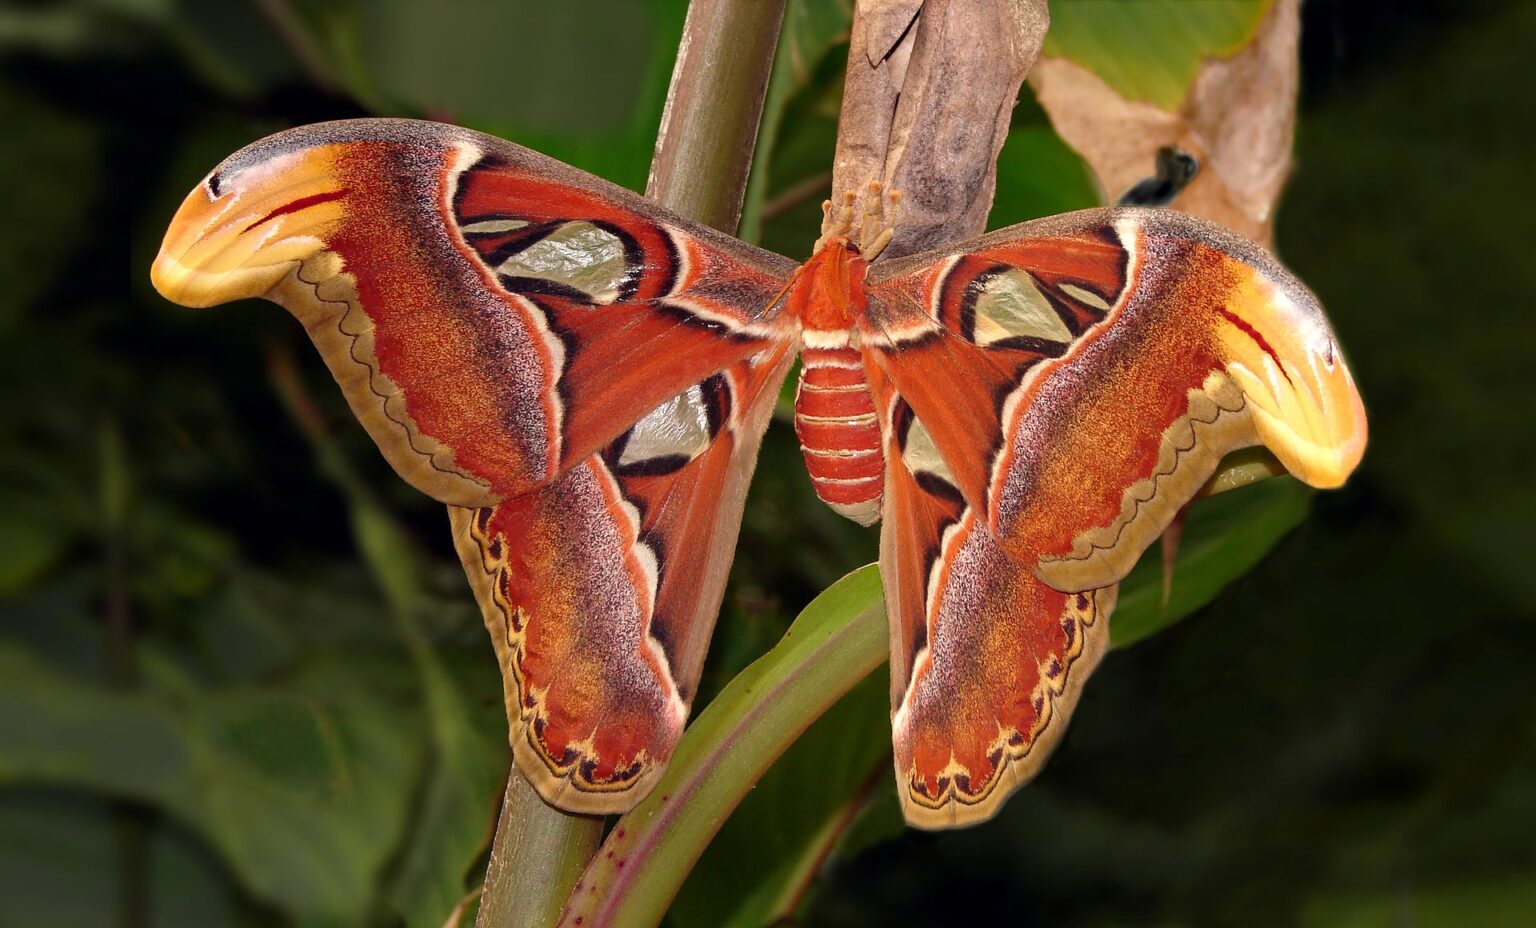 These amazing moths from Asian forests have a unique talent for looking like snakes.